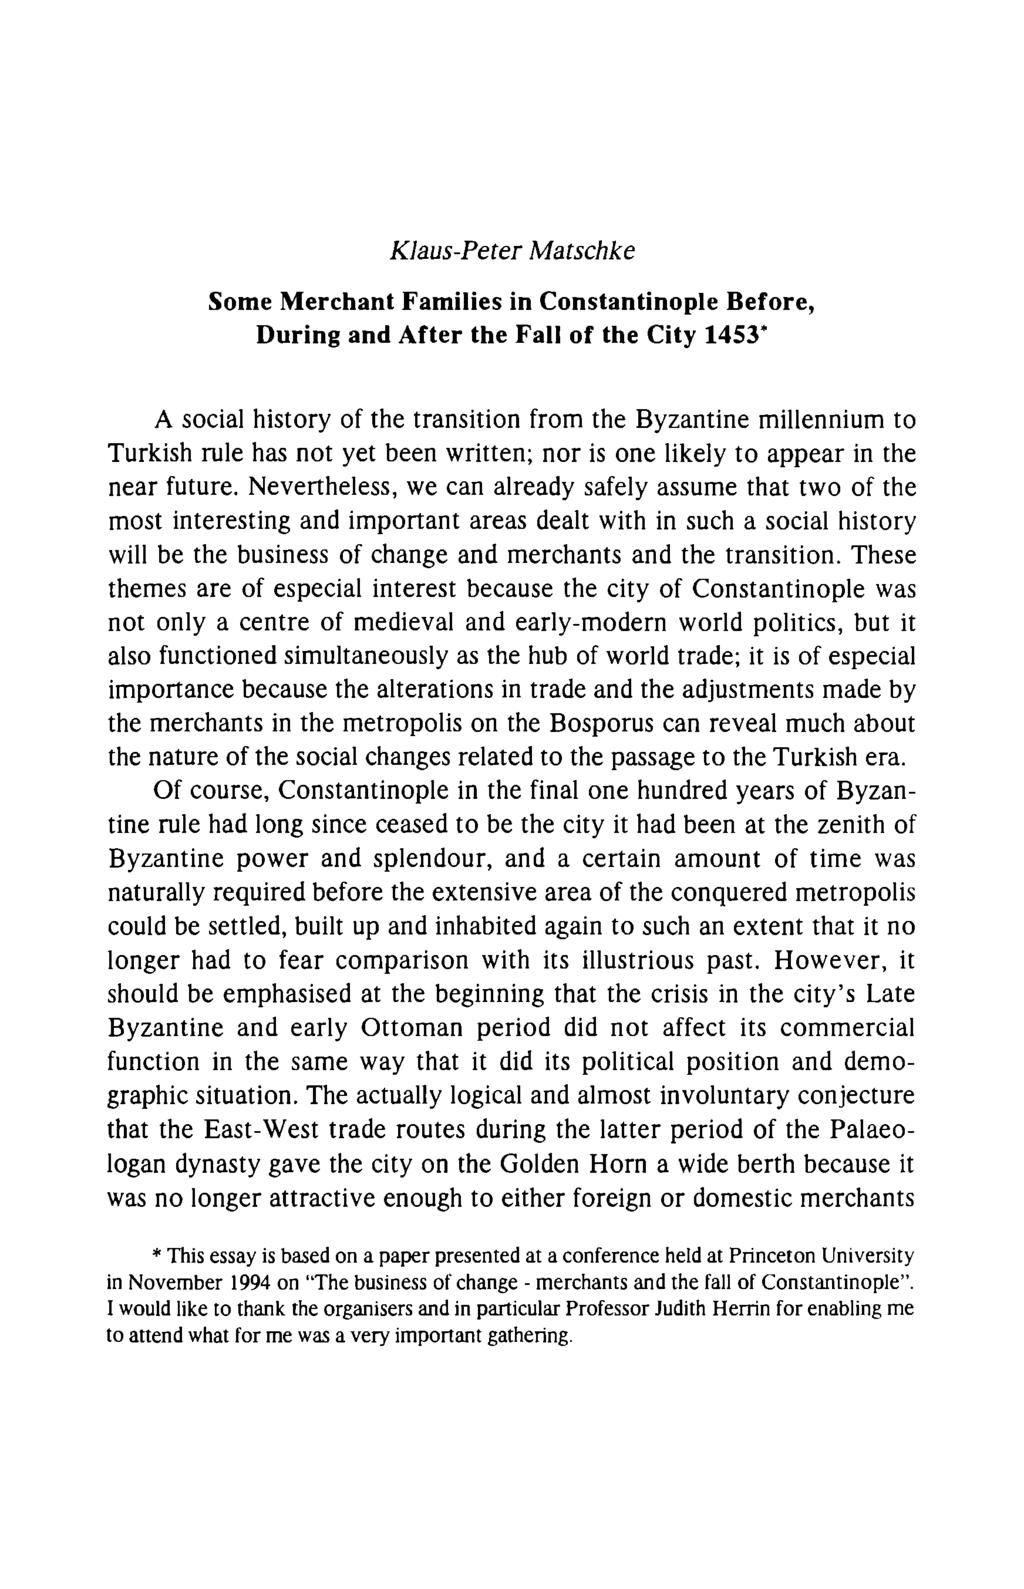 Klaus-Peter Matschke Some Merchant Families in Constantinople Before, During and After the Fall of the City 1453* A social history of the transition from the Byzantine millennium to Turkish rule has